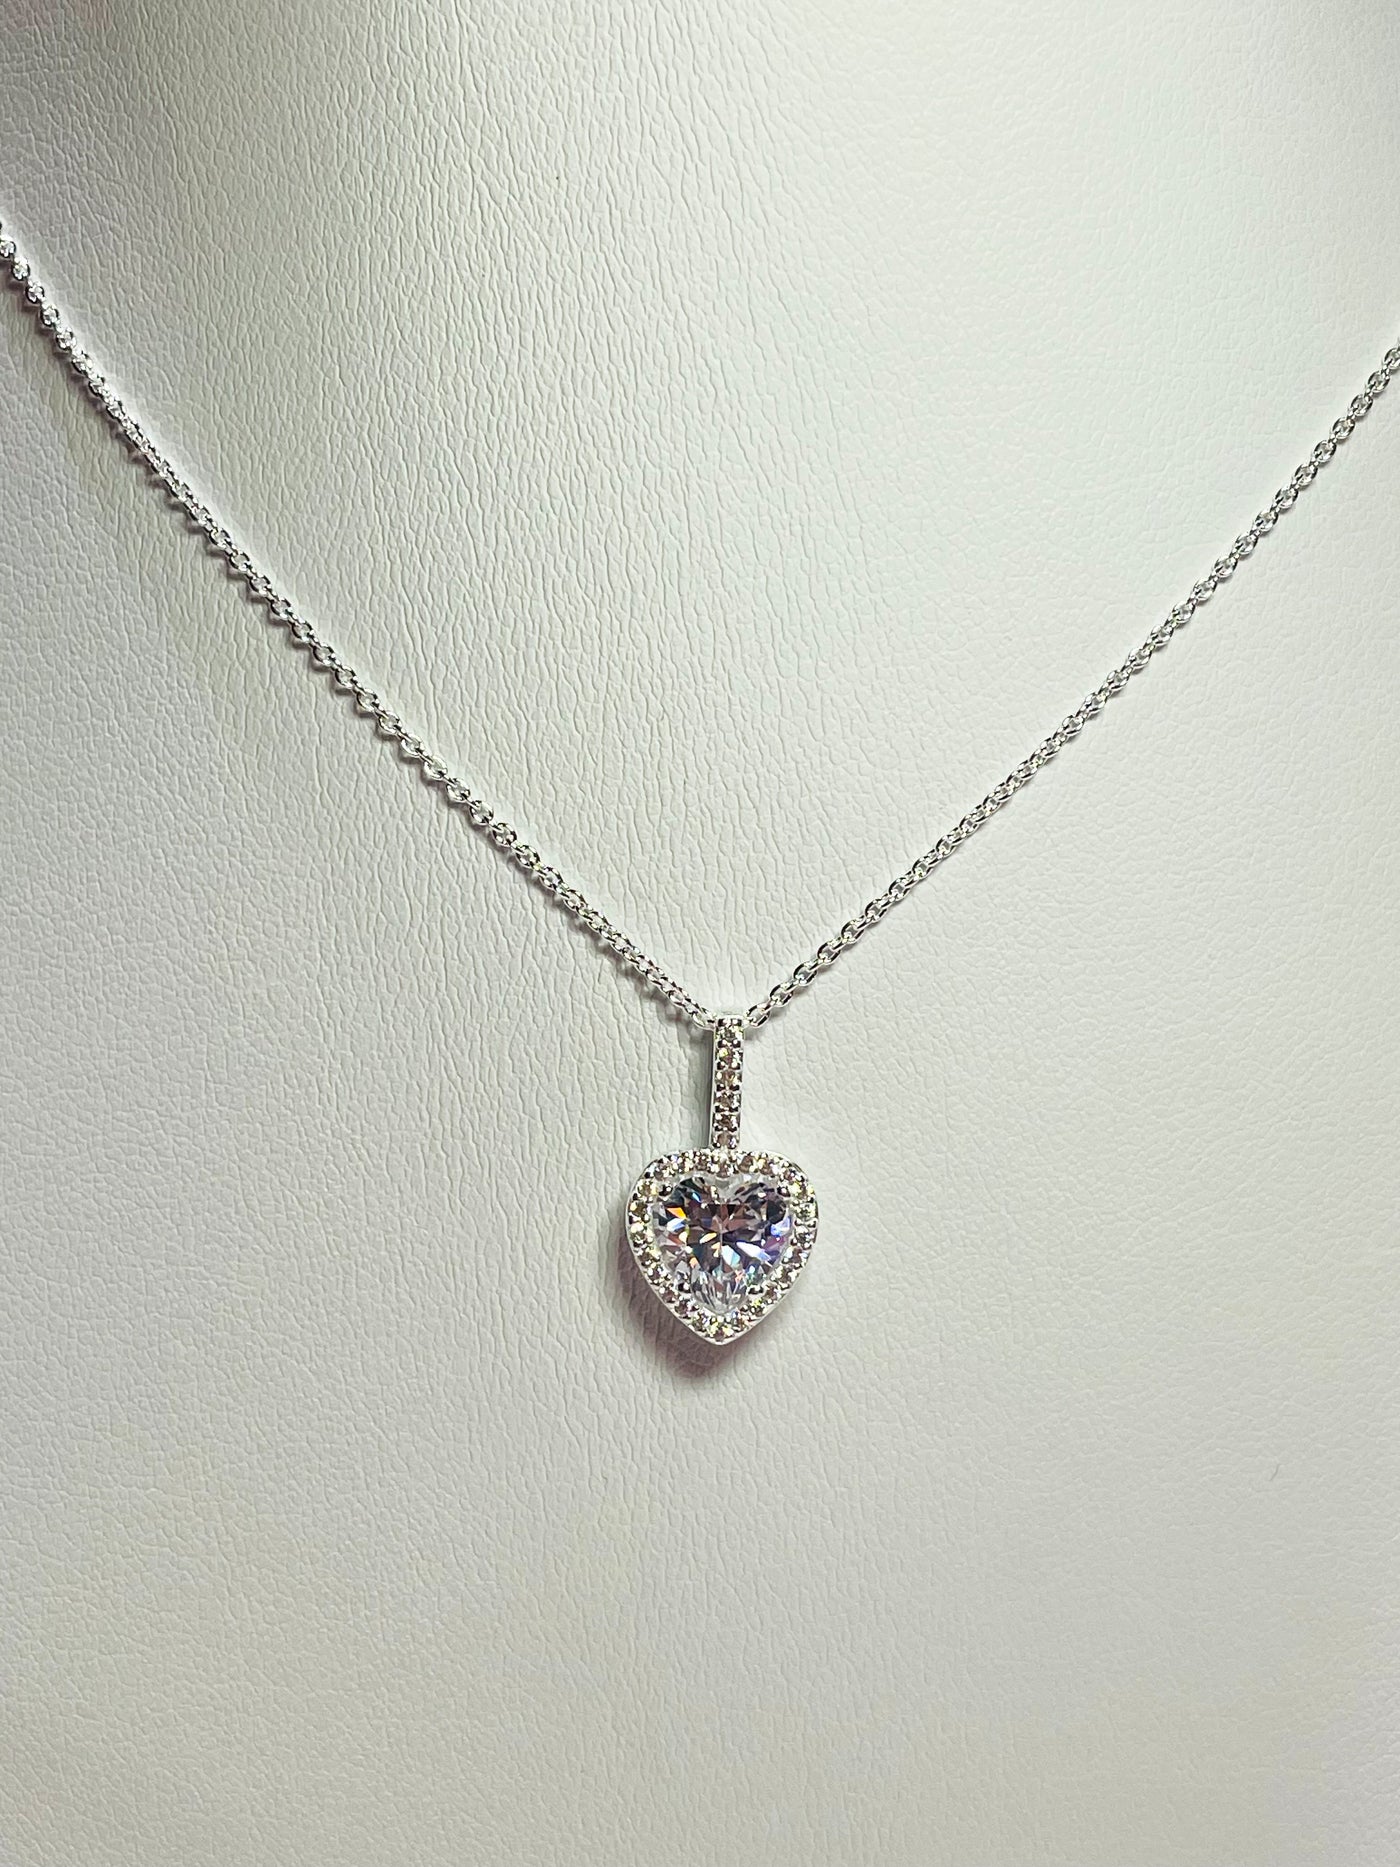 Crystal Halo Heart Necklace